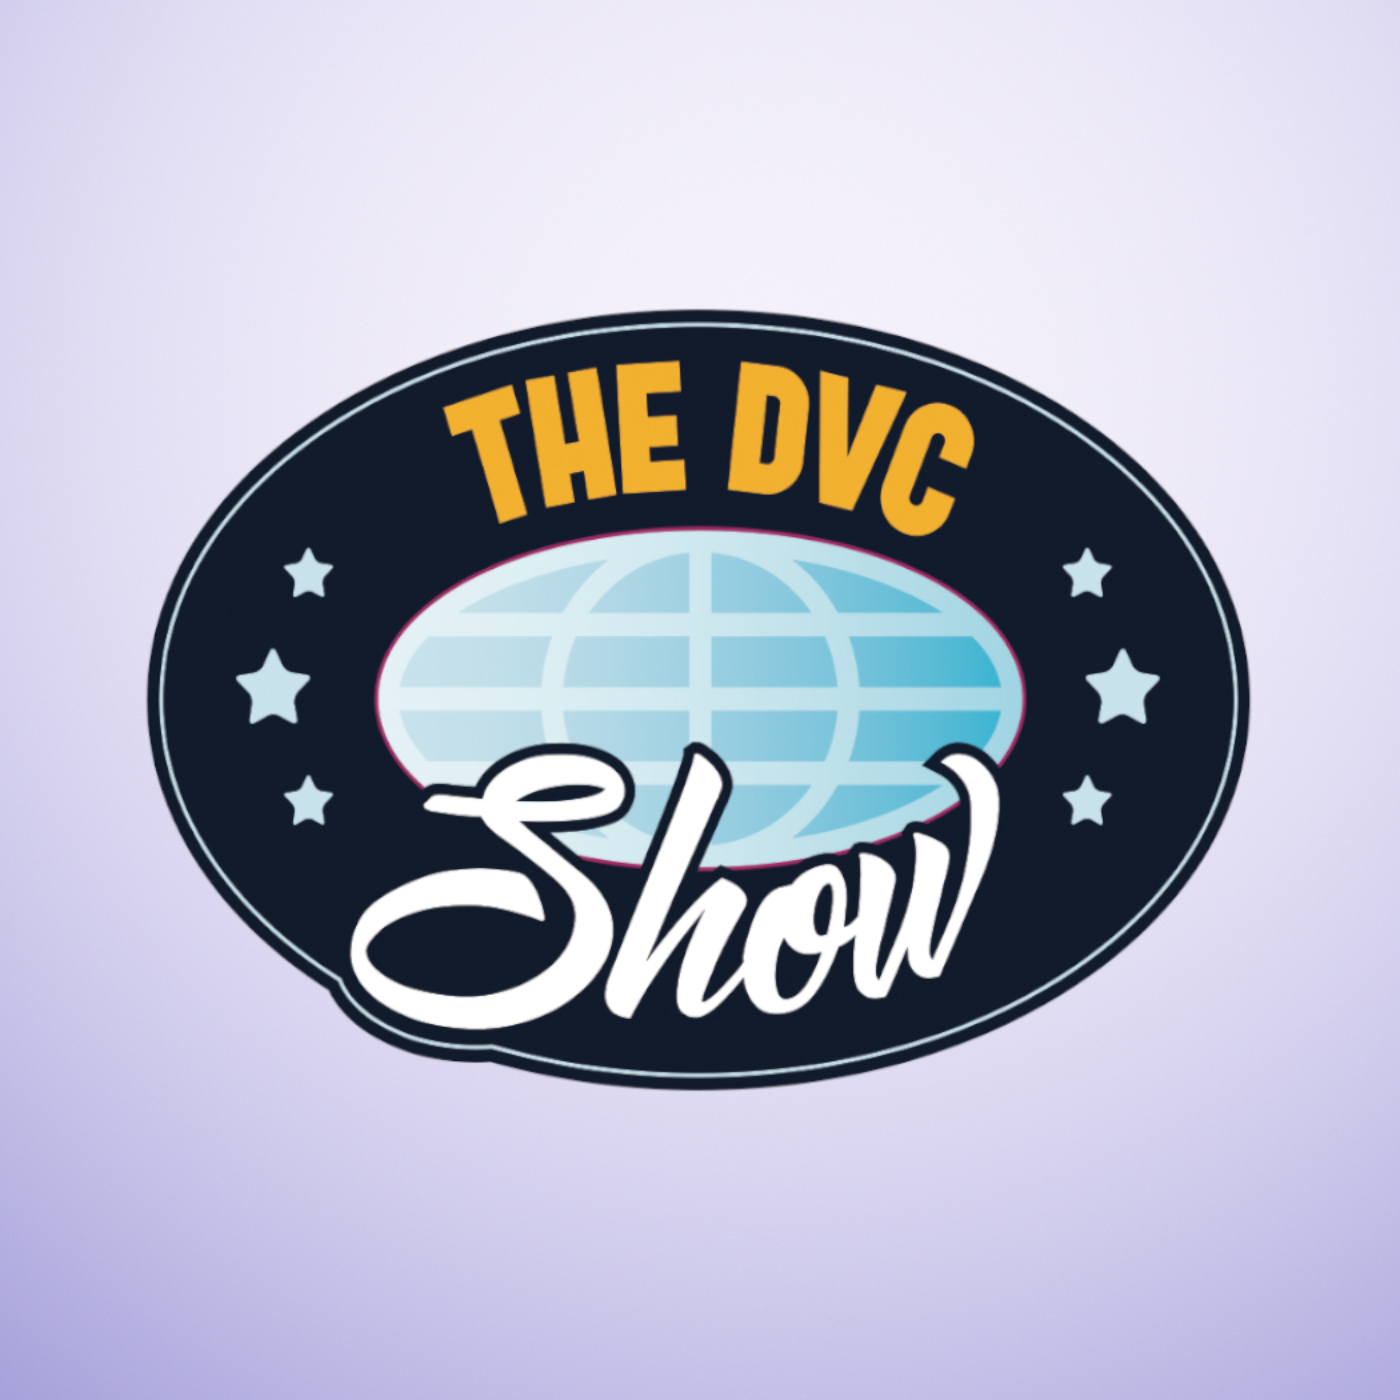 The DVC Show Podcast – 12/23/19